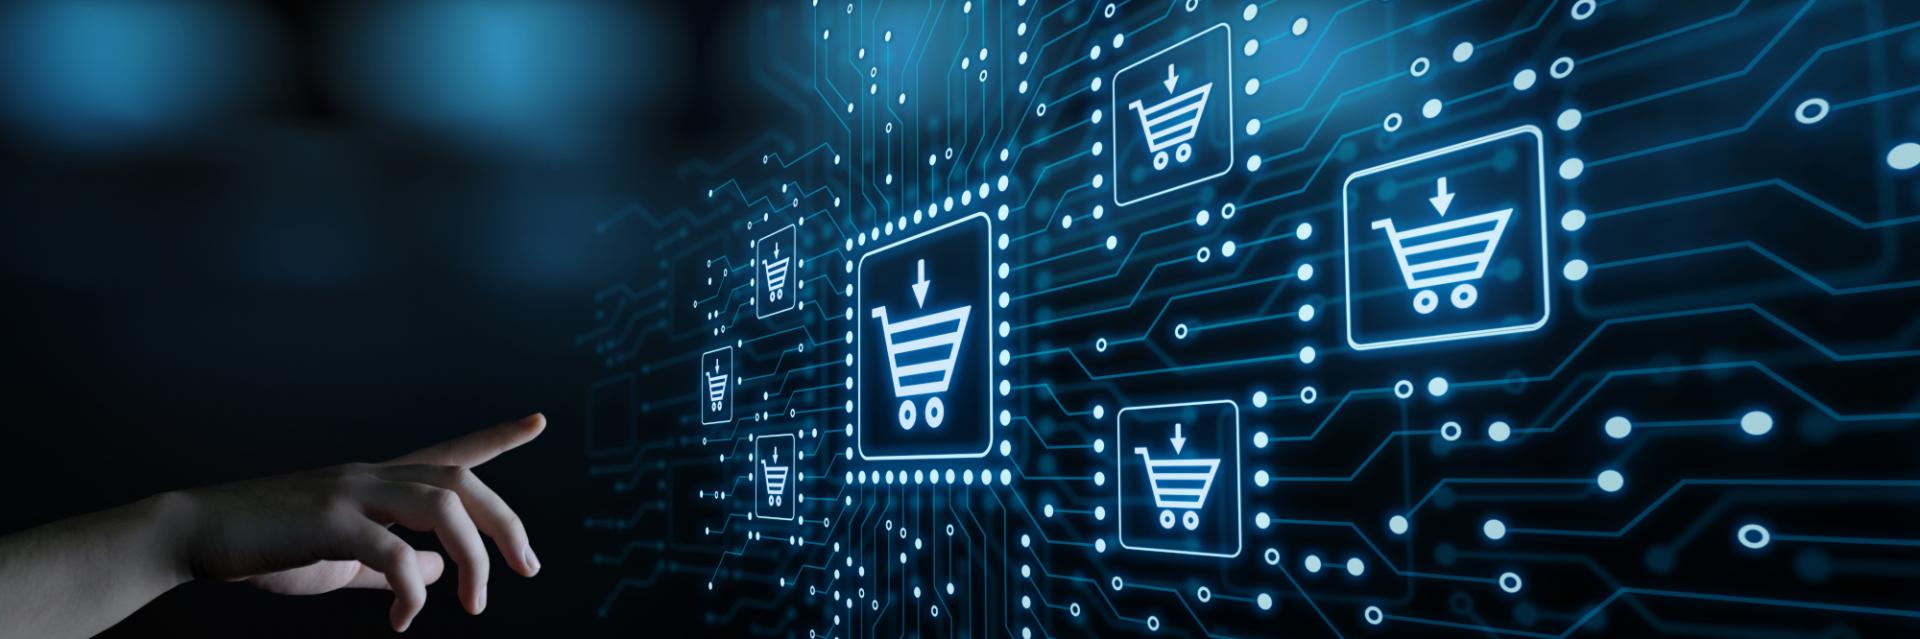 ECA to launch report on the impact of COVID-19 on e-Commerce in Africa